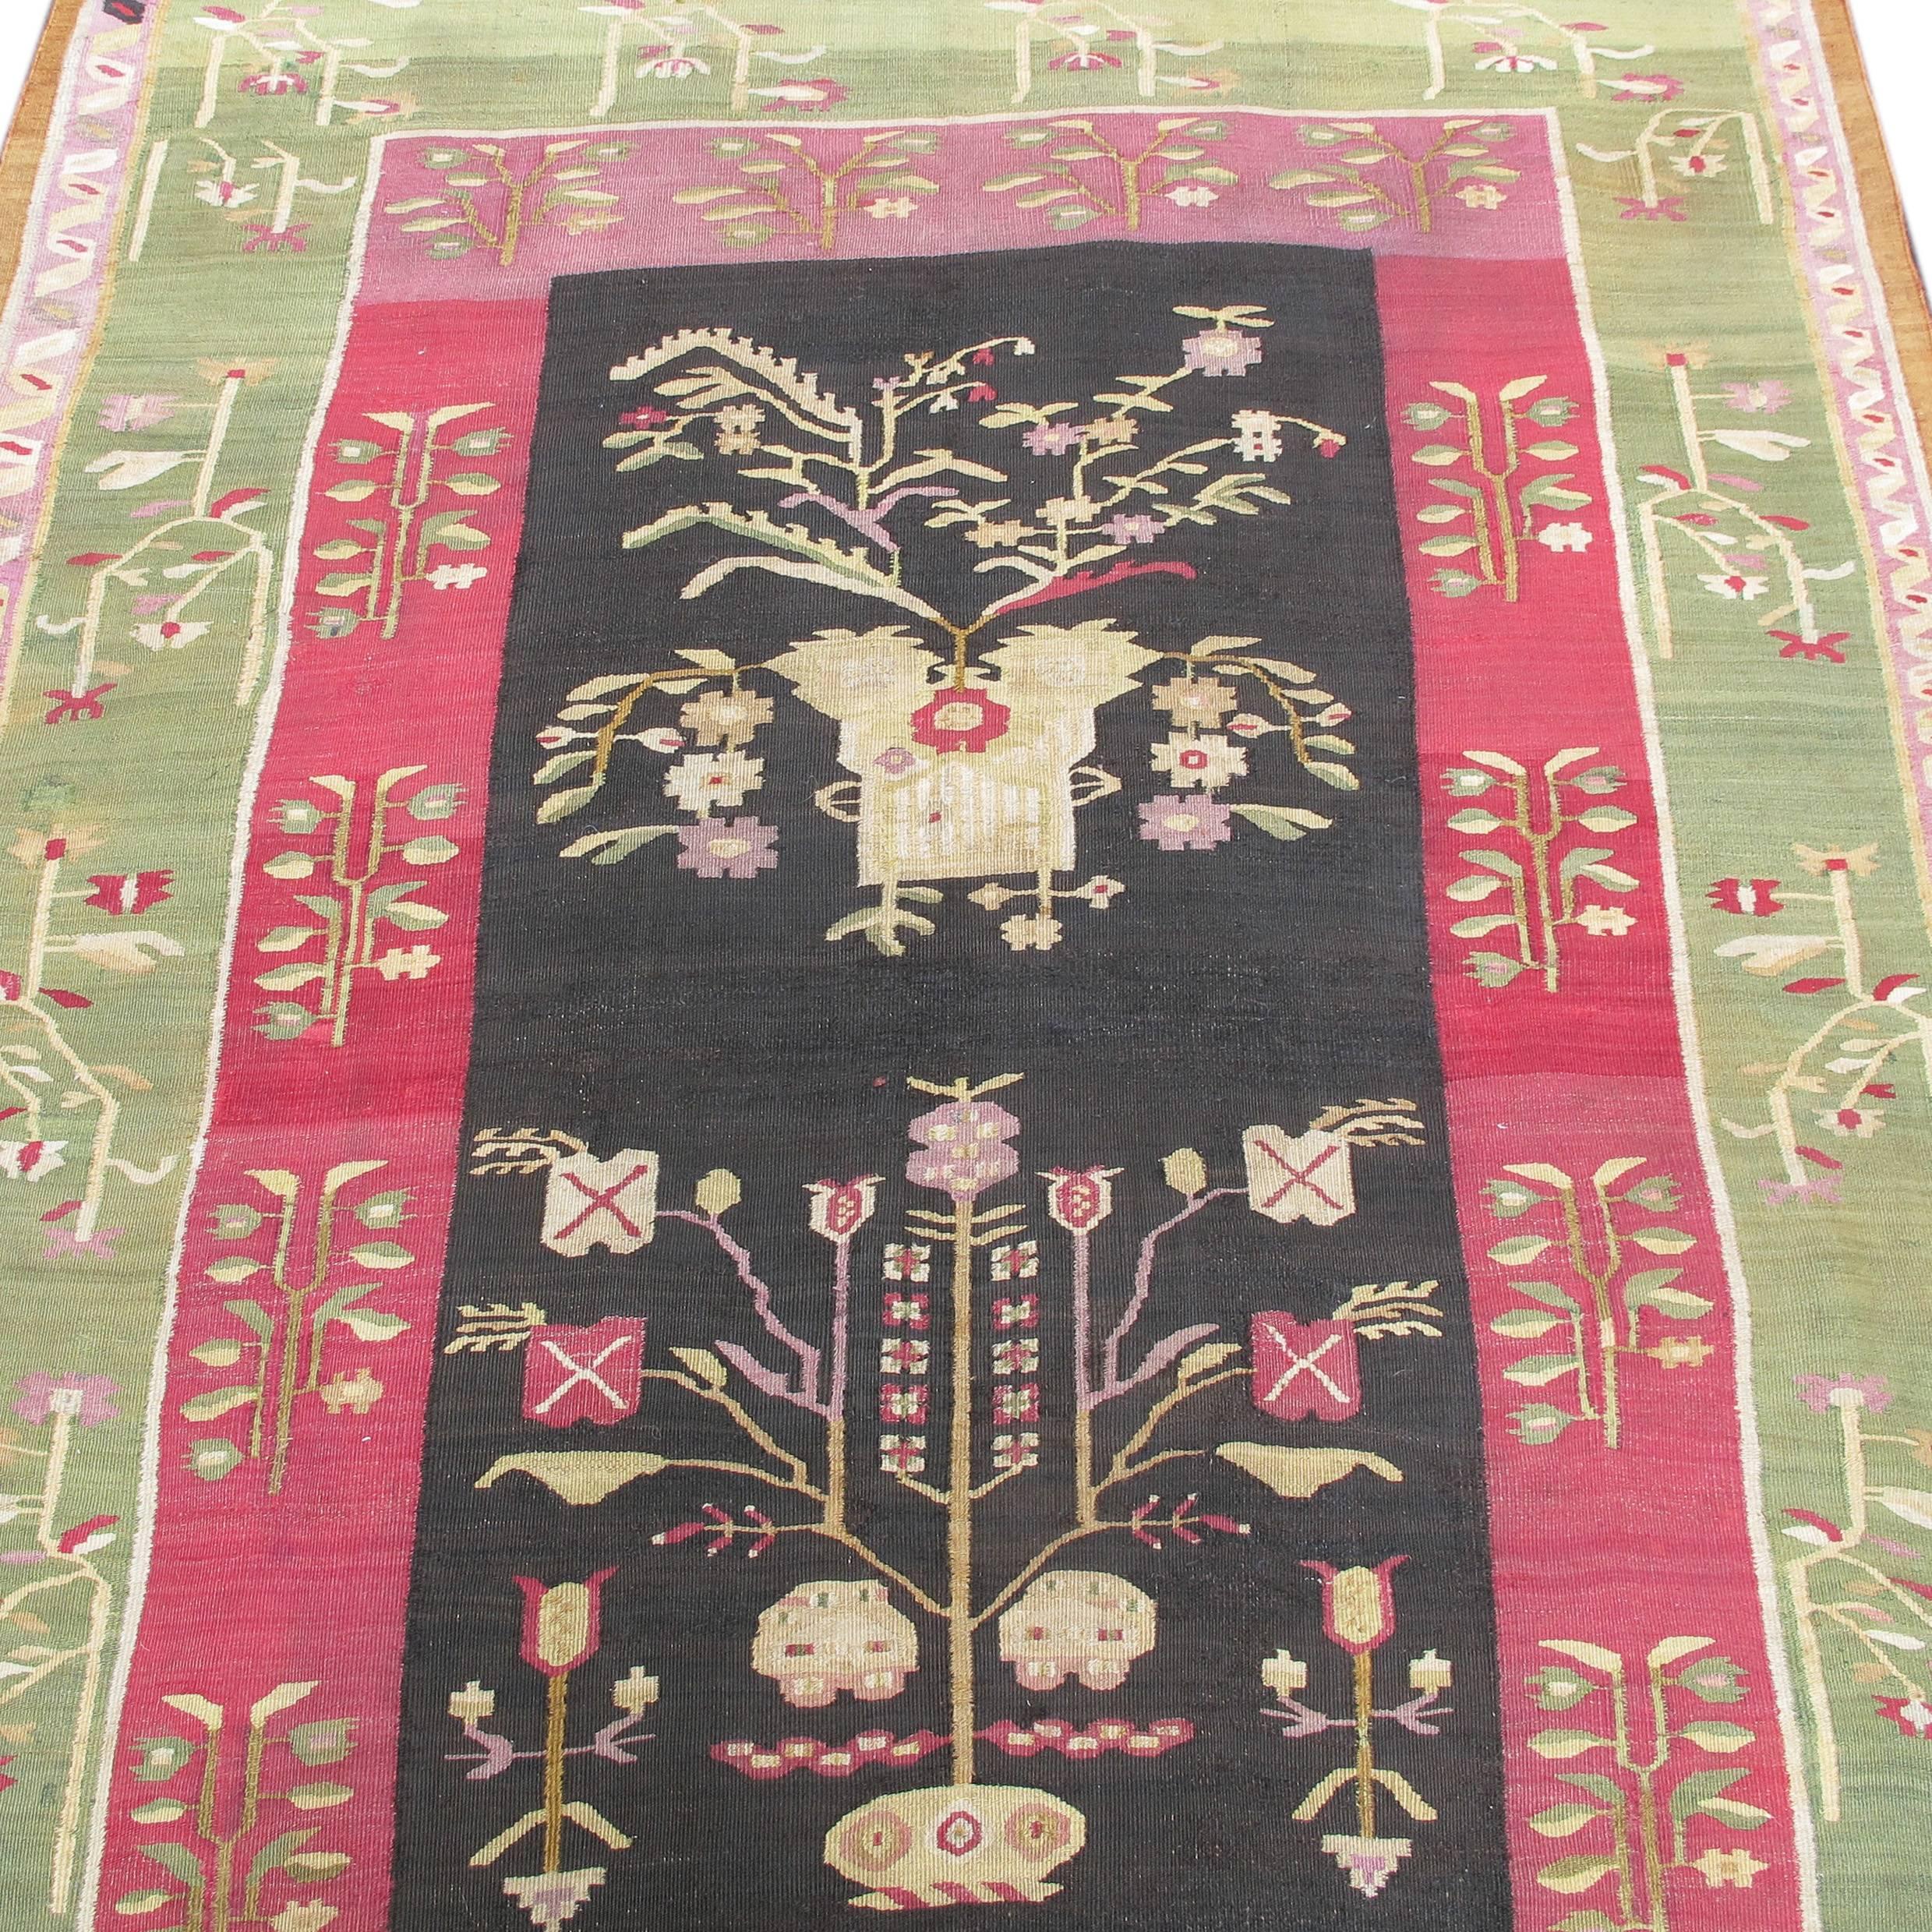 Pile carpets and flat-weaves known in the market as 'Bessarabian' were woven mostly in the 19th century in what are now the countries of Romania, Moldova, and Ukraine—along the northwestern coastal areas of the Black Sea (in eastern Europe). Both